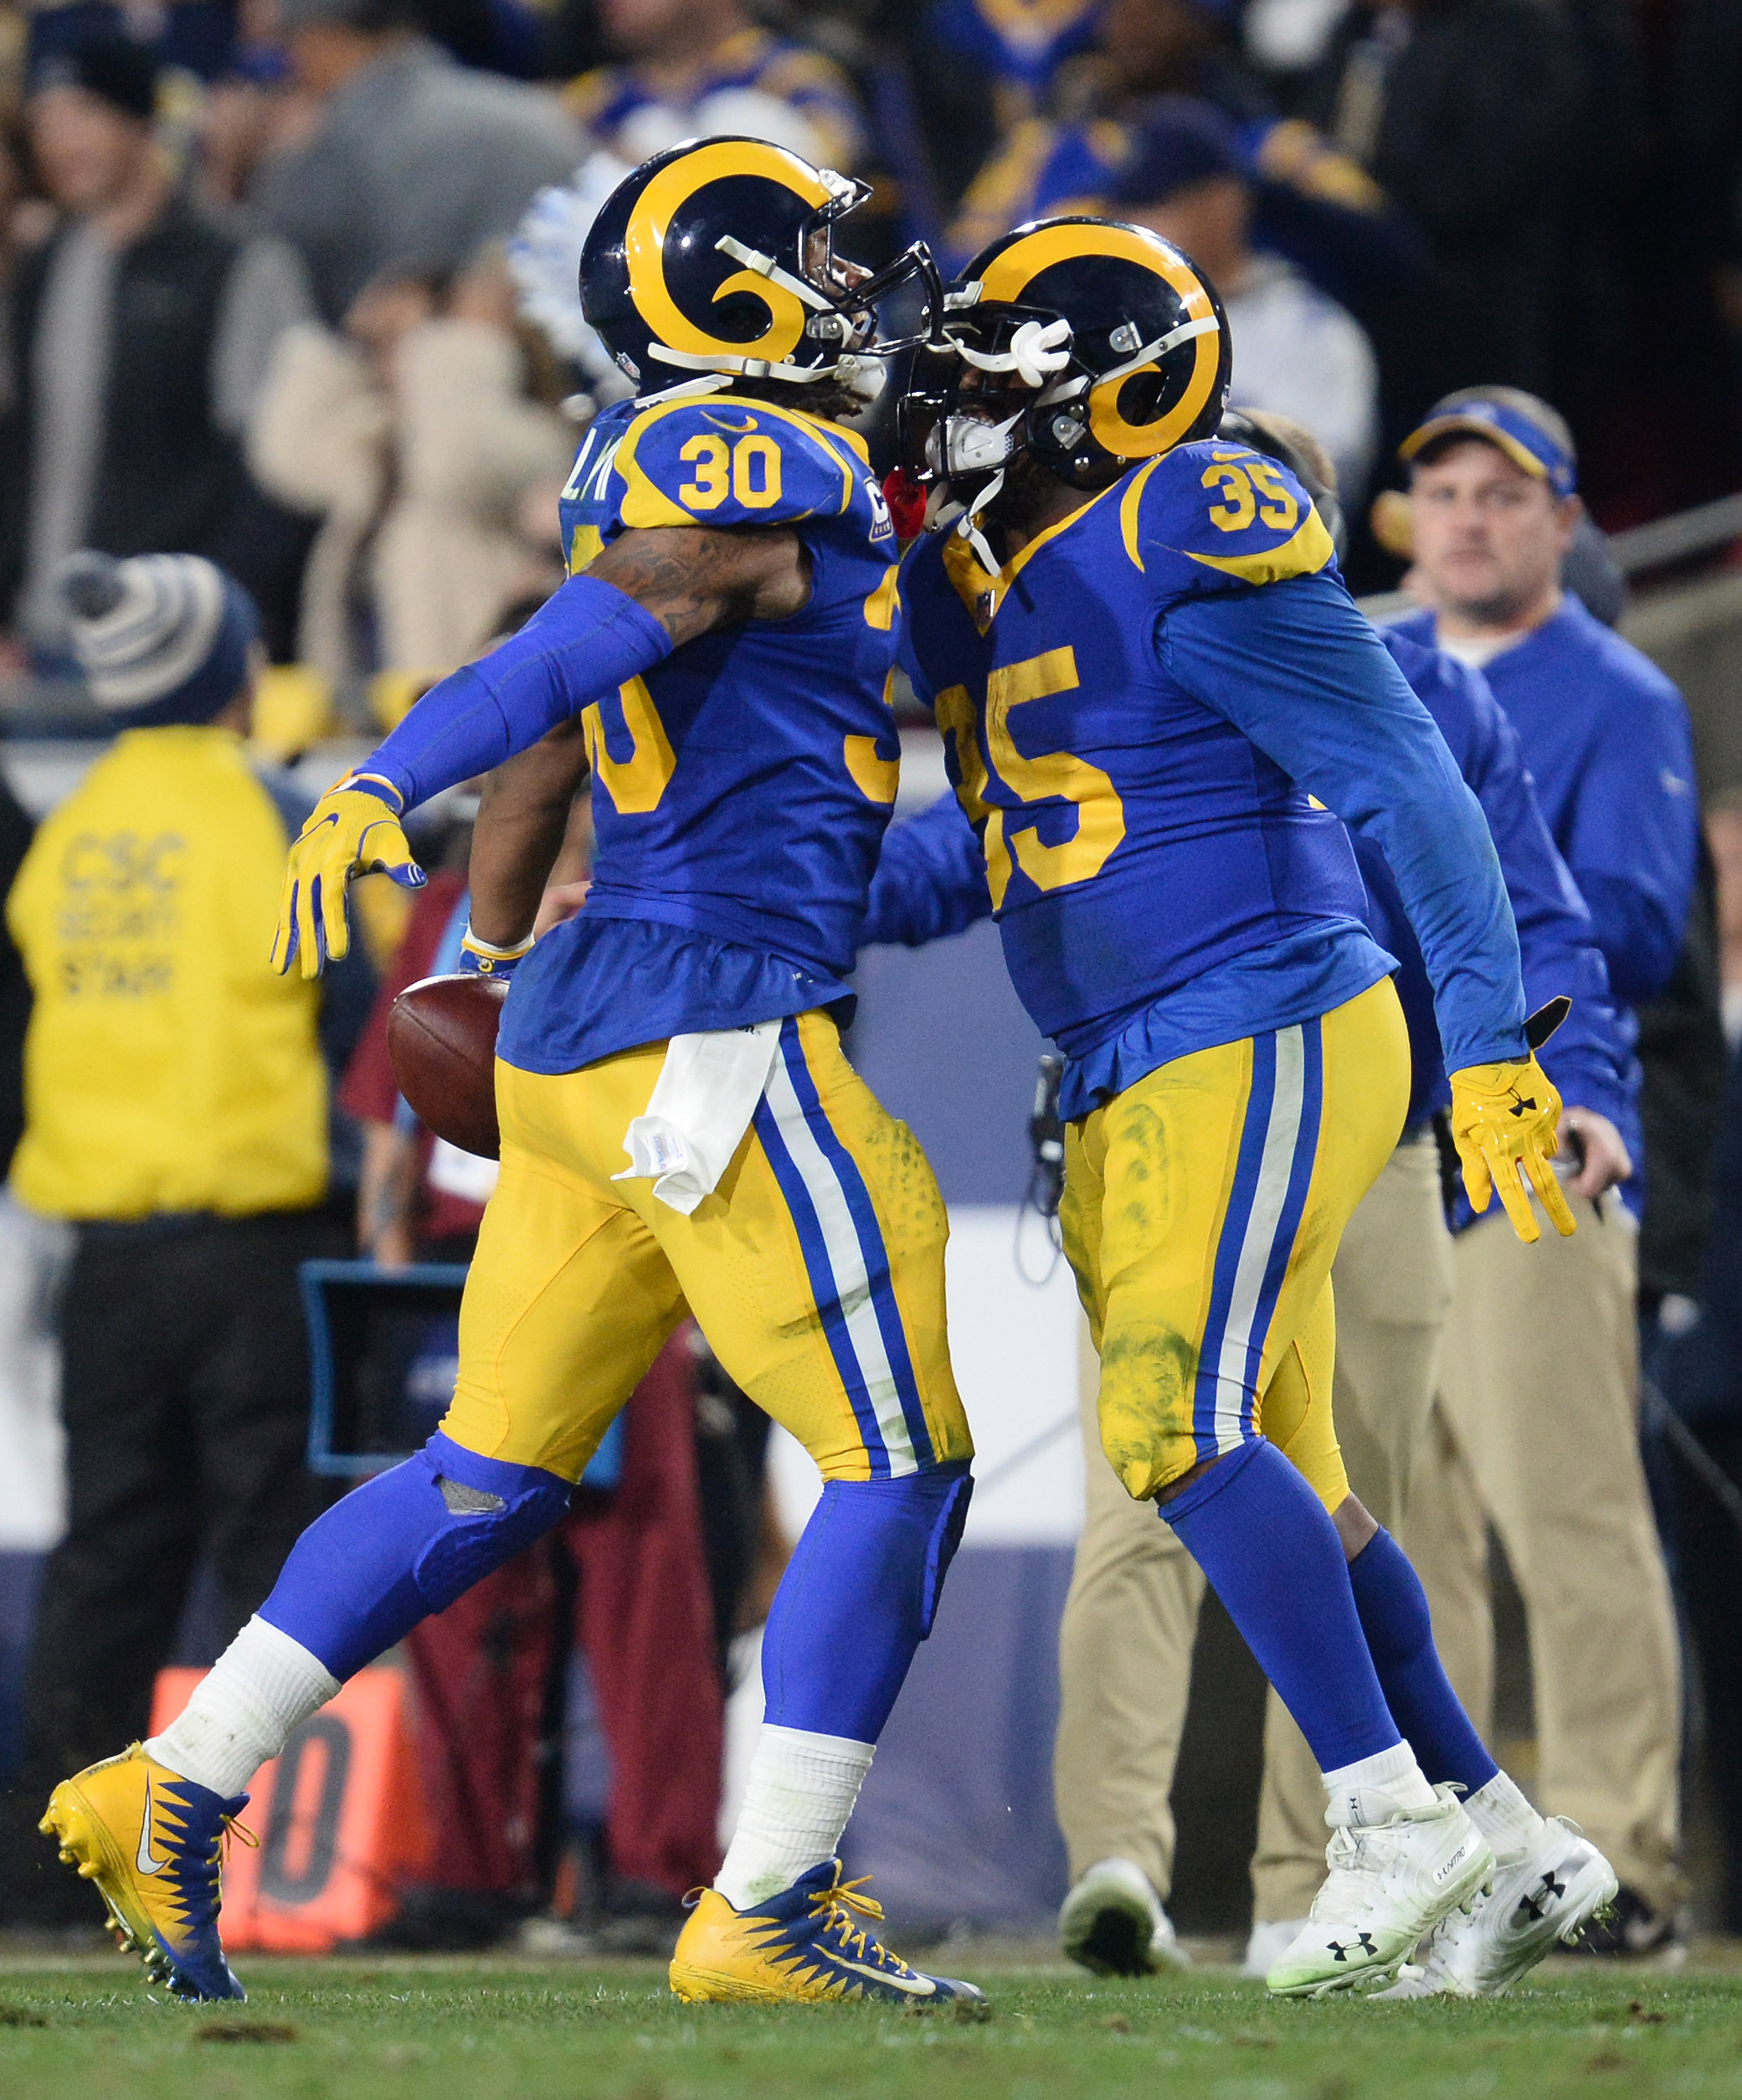 Los Angeles Rams RB Todd Gurley celebrates with RB C.J. Anderson after scoring a touchdown against the Dallas Cowboys in the Divisional Round of the 2019 NFL Playoffs, Jan. 12, 2019.